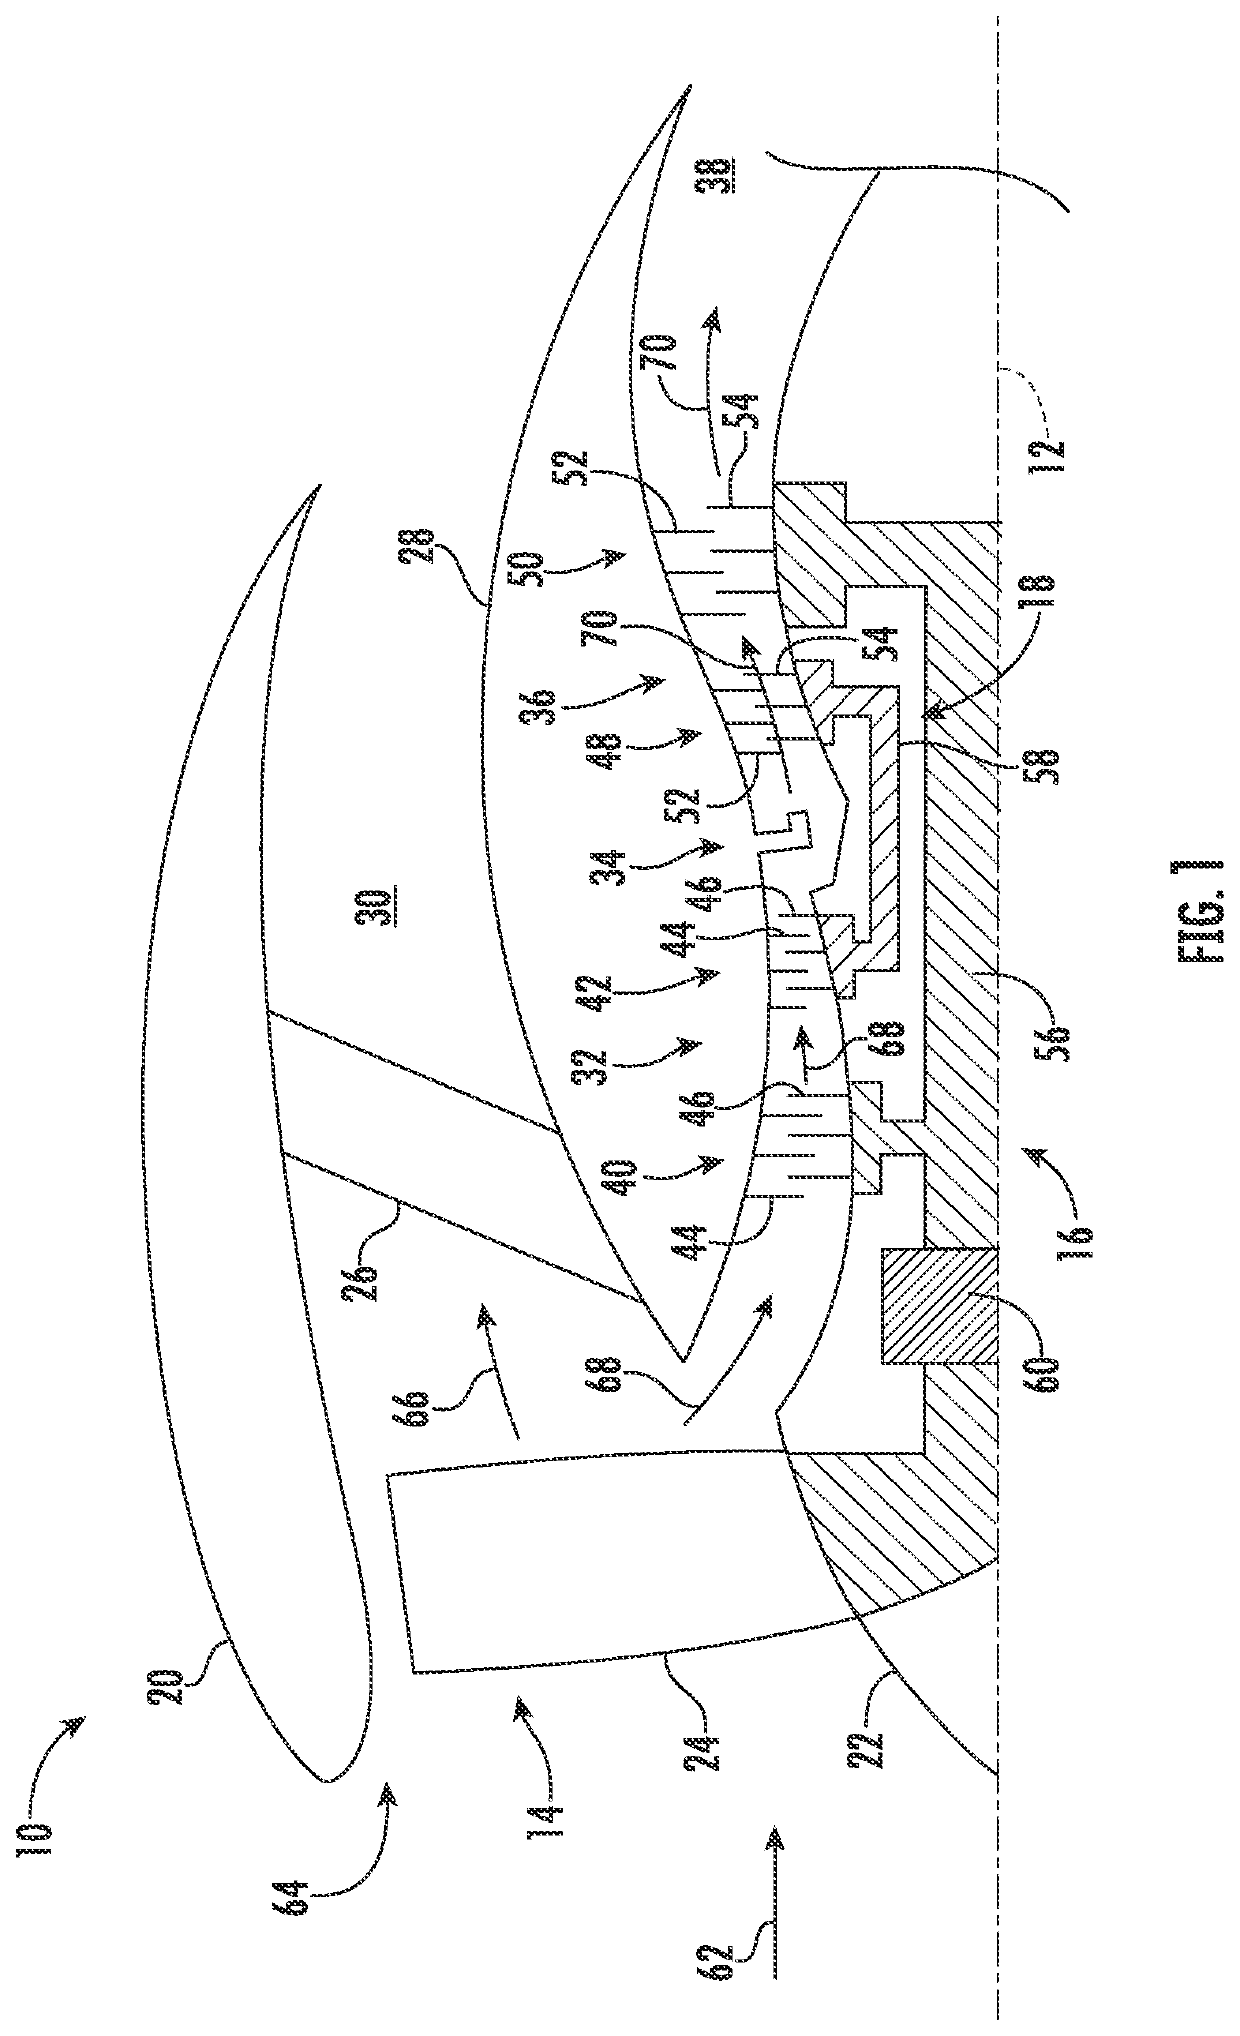 System for lubricating components of a gas turbine engine including a lubricant bypass conduit